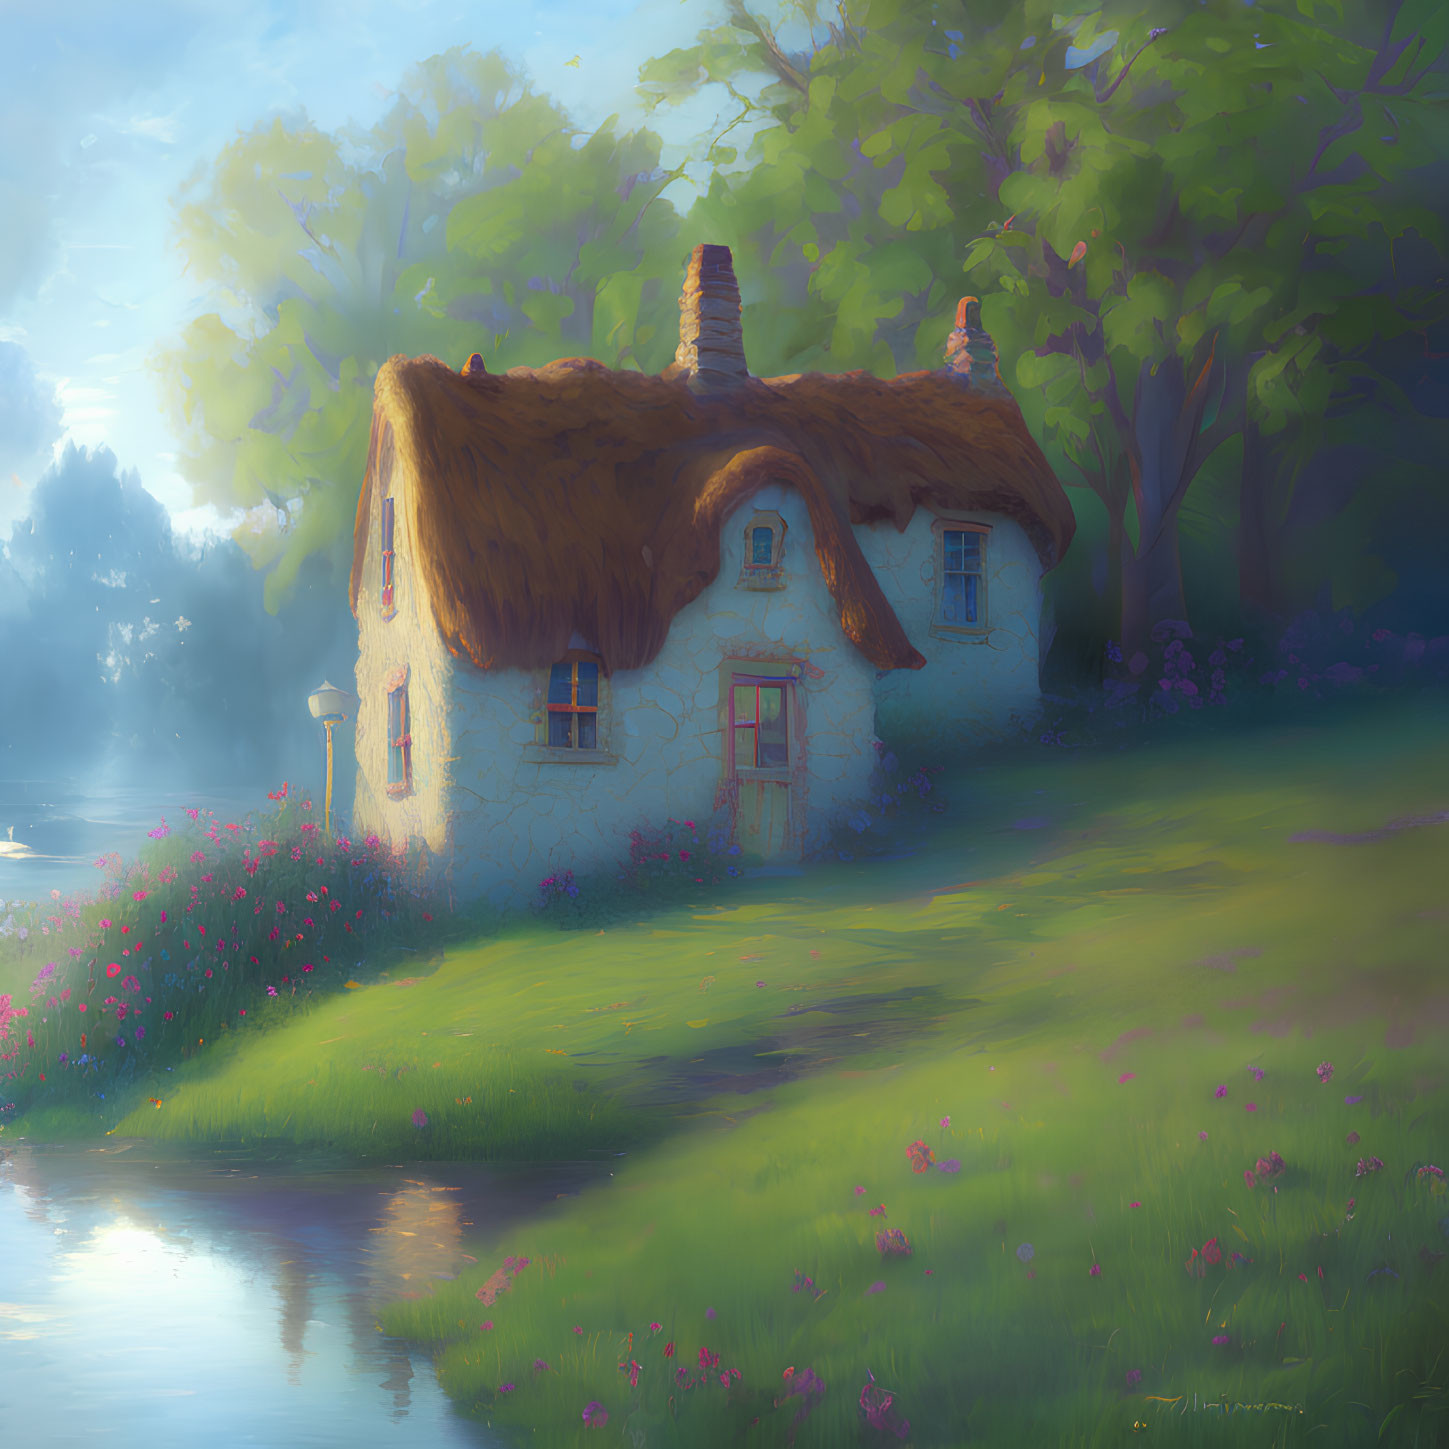 Thatched cottage with red windows in serene nature scene